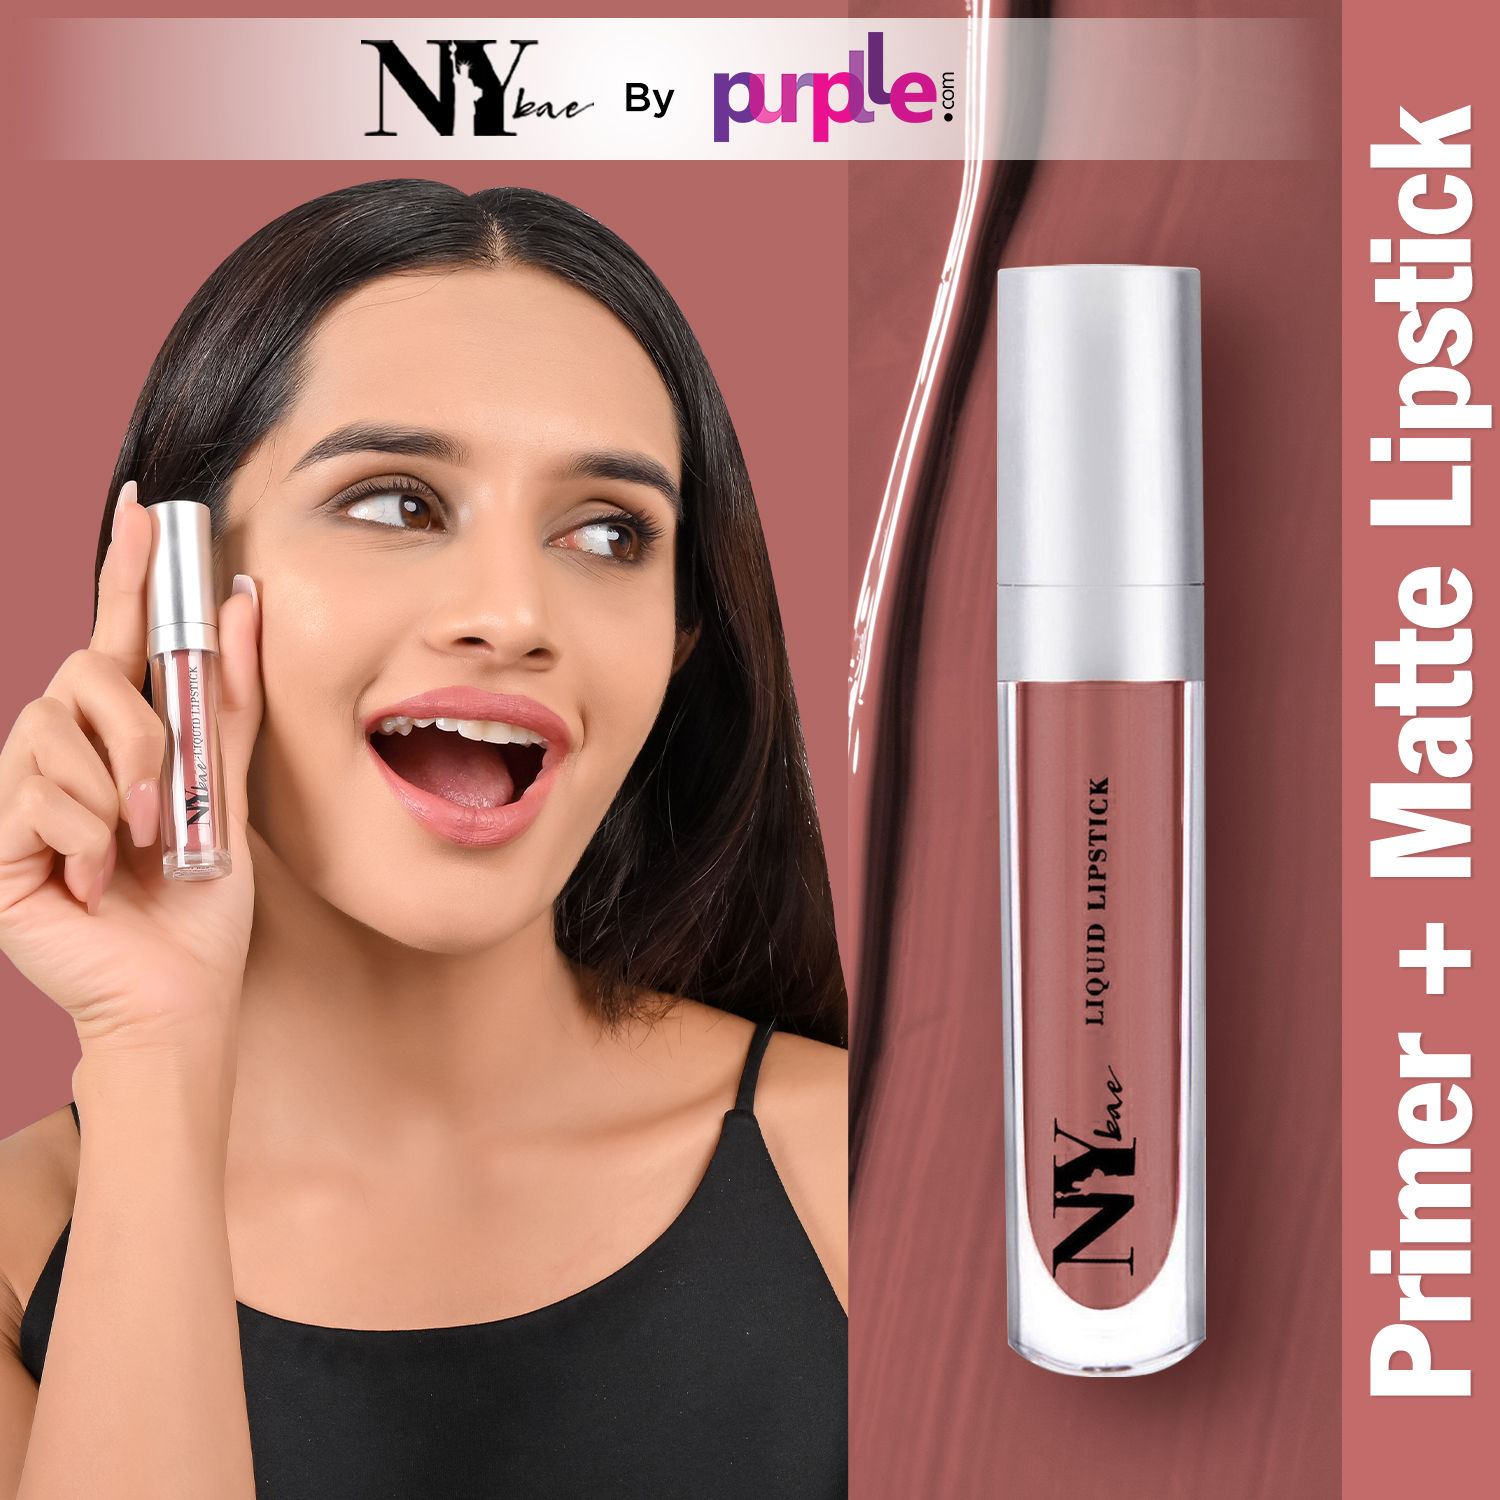 NY Bae Confessions of a Lip-a-holic Liquid Lipstick - More Shots 11 (4.5 ml) | Light Brown | Matte Finish | Built-in Primer | Enriched with Jojoba Oil | Highly Pigmented | Lasts Upto 12 Hours | Long lasting | Cruelty & Paraben Free